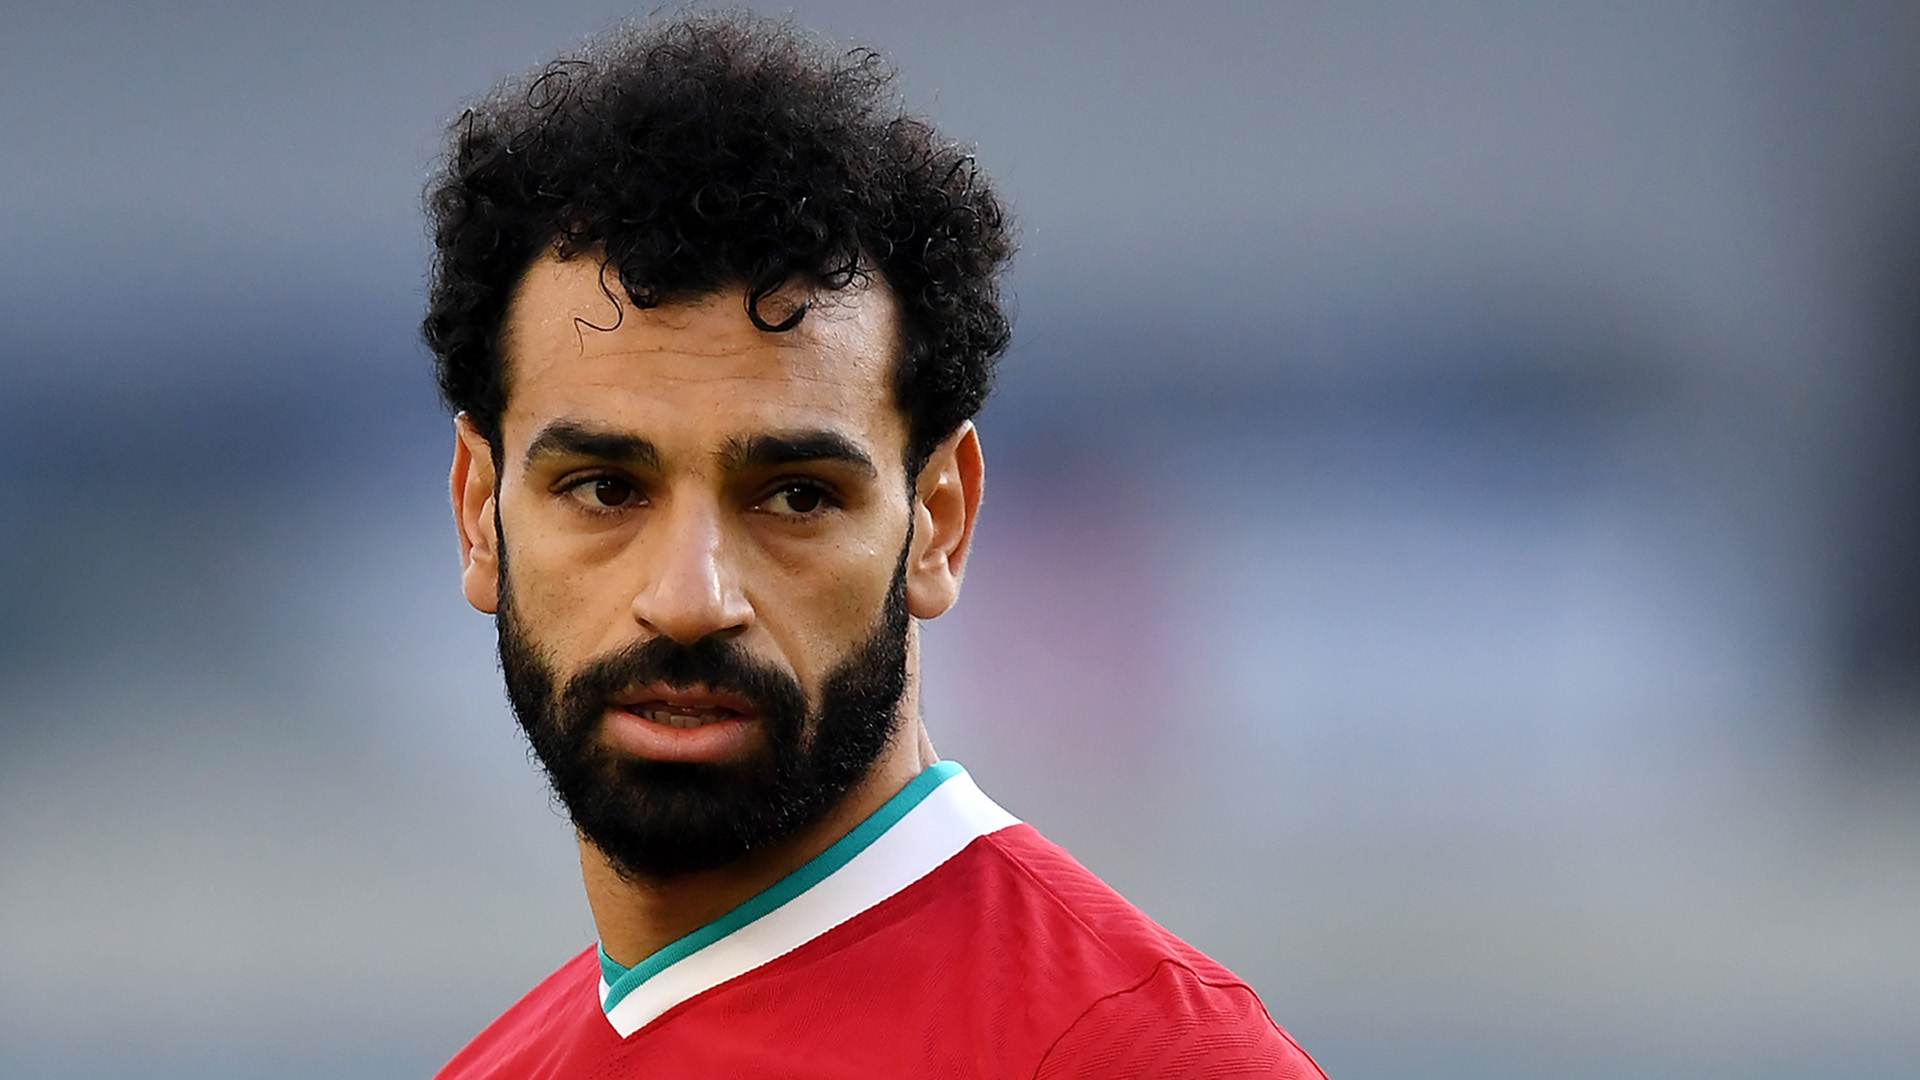 Liverpool boss Klopp explains why Salah played full 90 minutes in dead rubber against Midtjylland